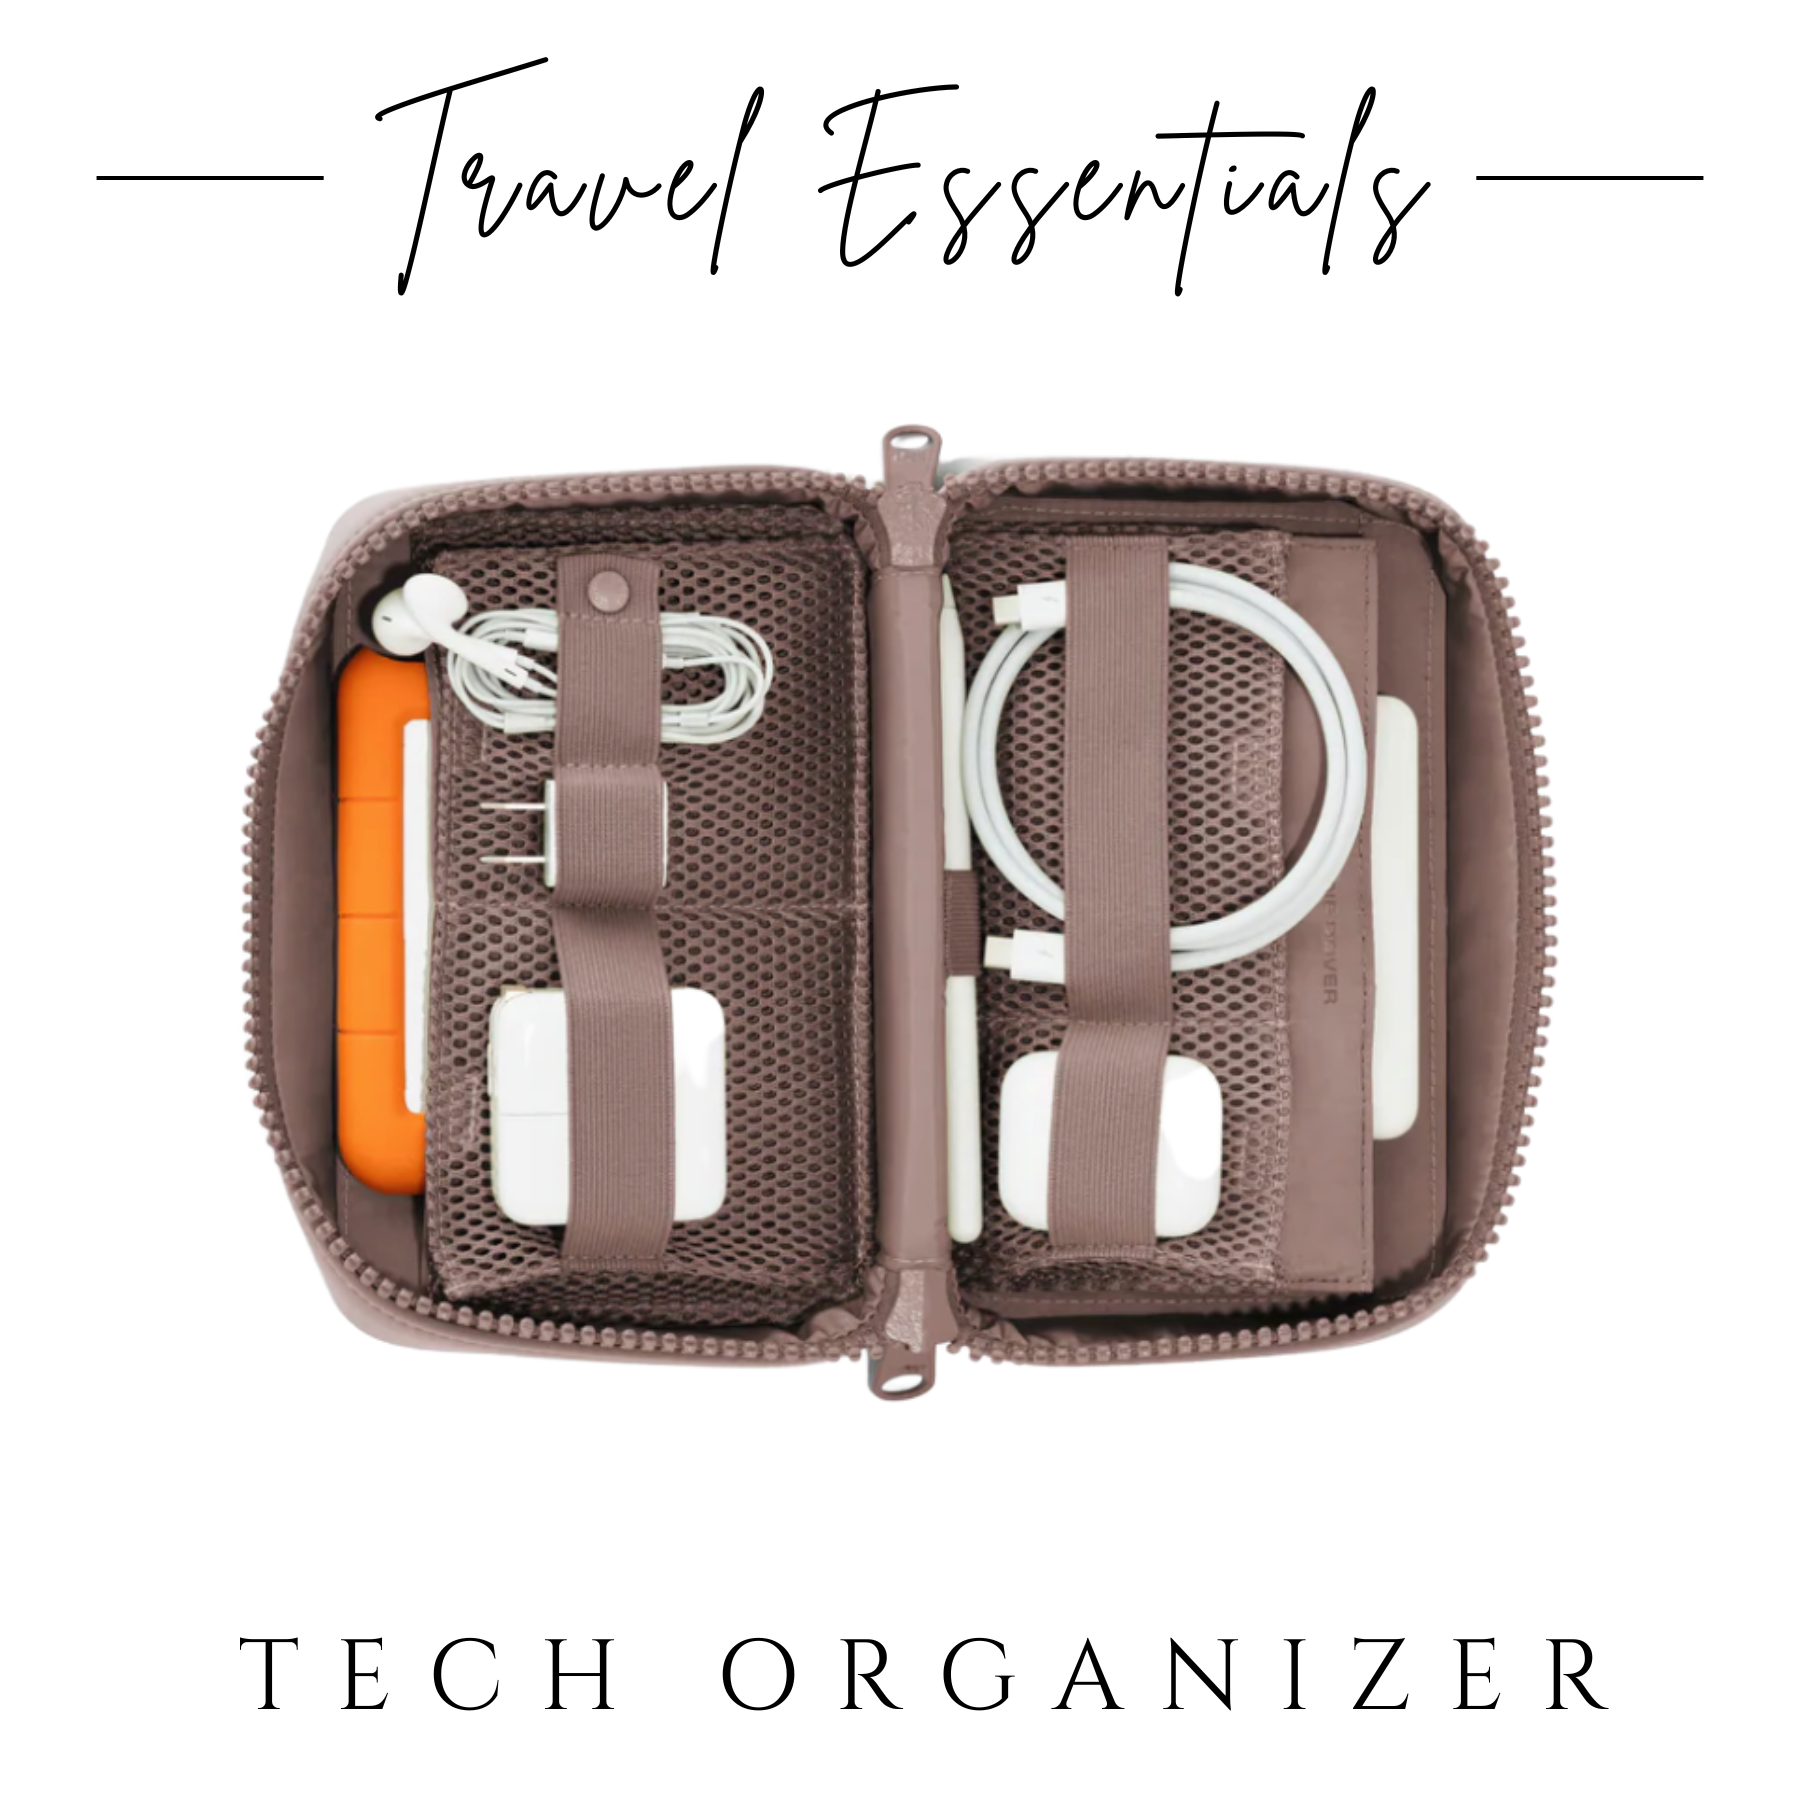 Travel Essentials
#travel #packing #Packingessentials #luggage #carryon #tech #organizers #travelbag #tech #organization 